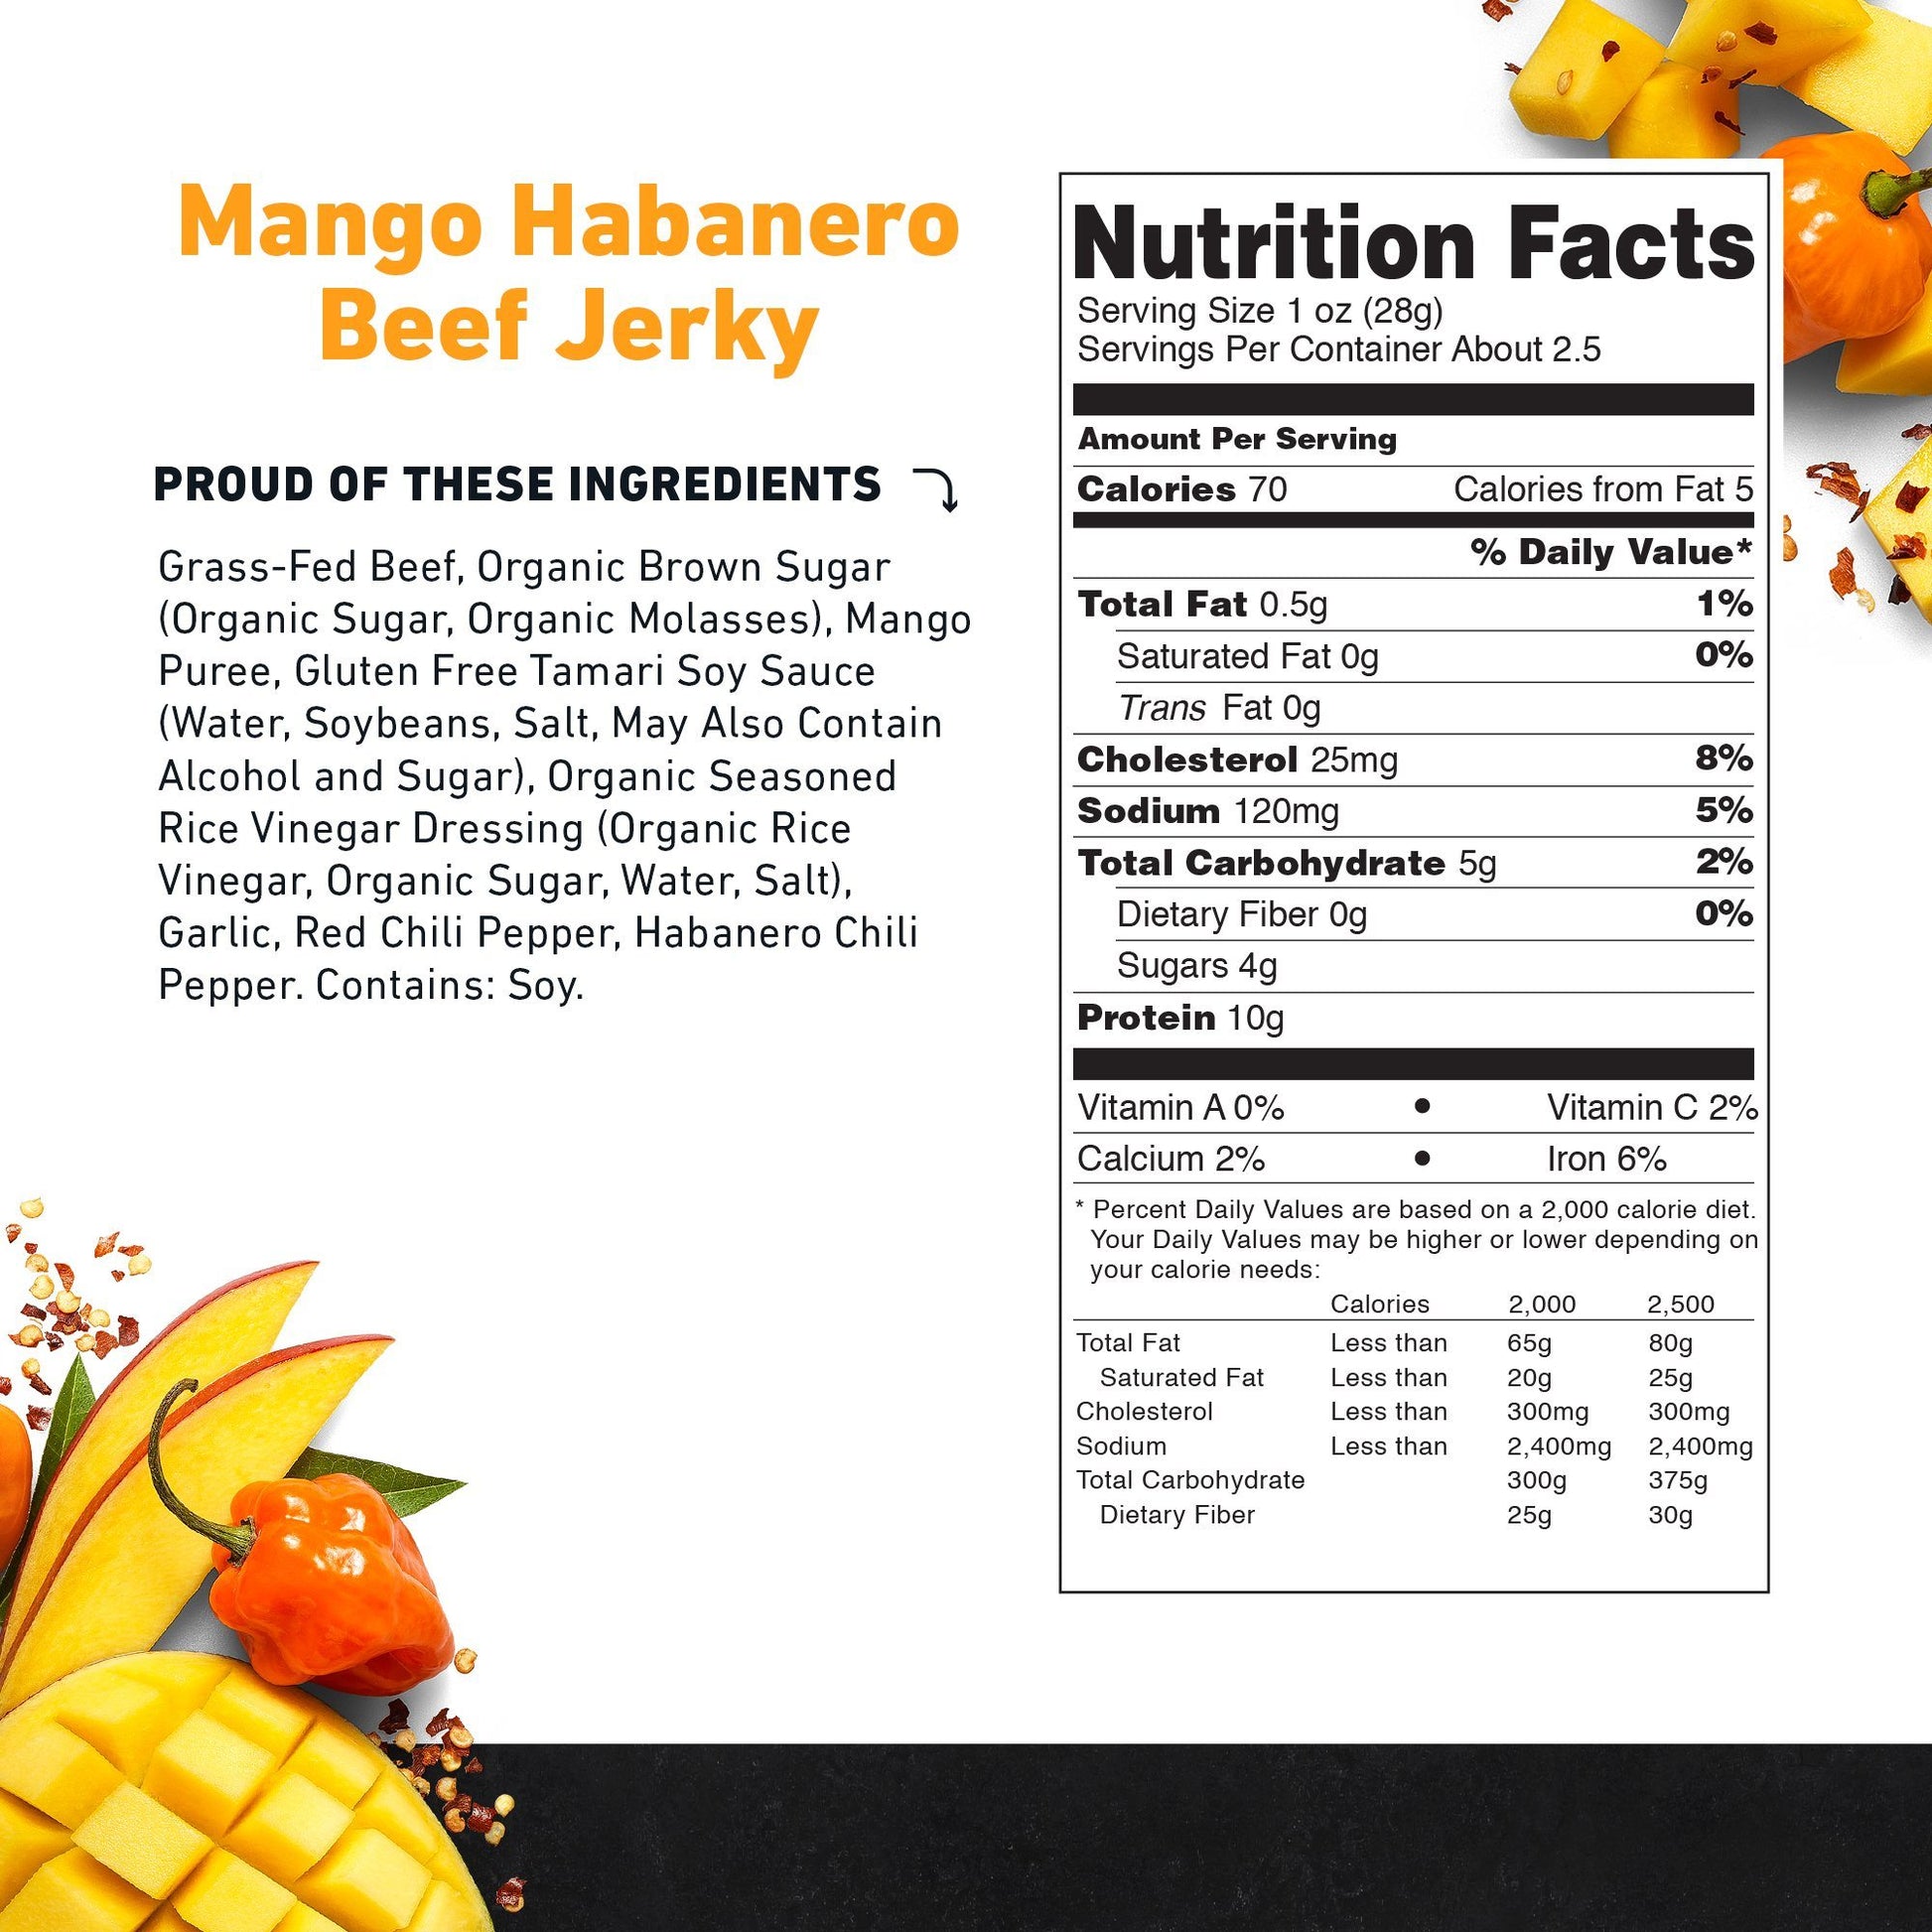  Mango Habanero Beef Jerky by Country Archer, Mango Habanero Beef Jerky, Beef, mango-habanero-beef-jerky, , 2.5oz Bag